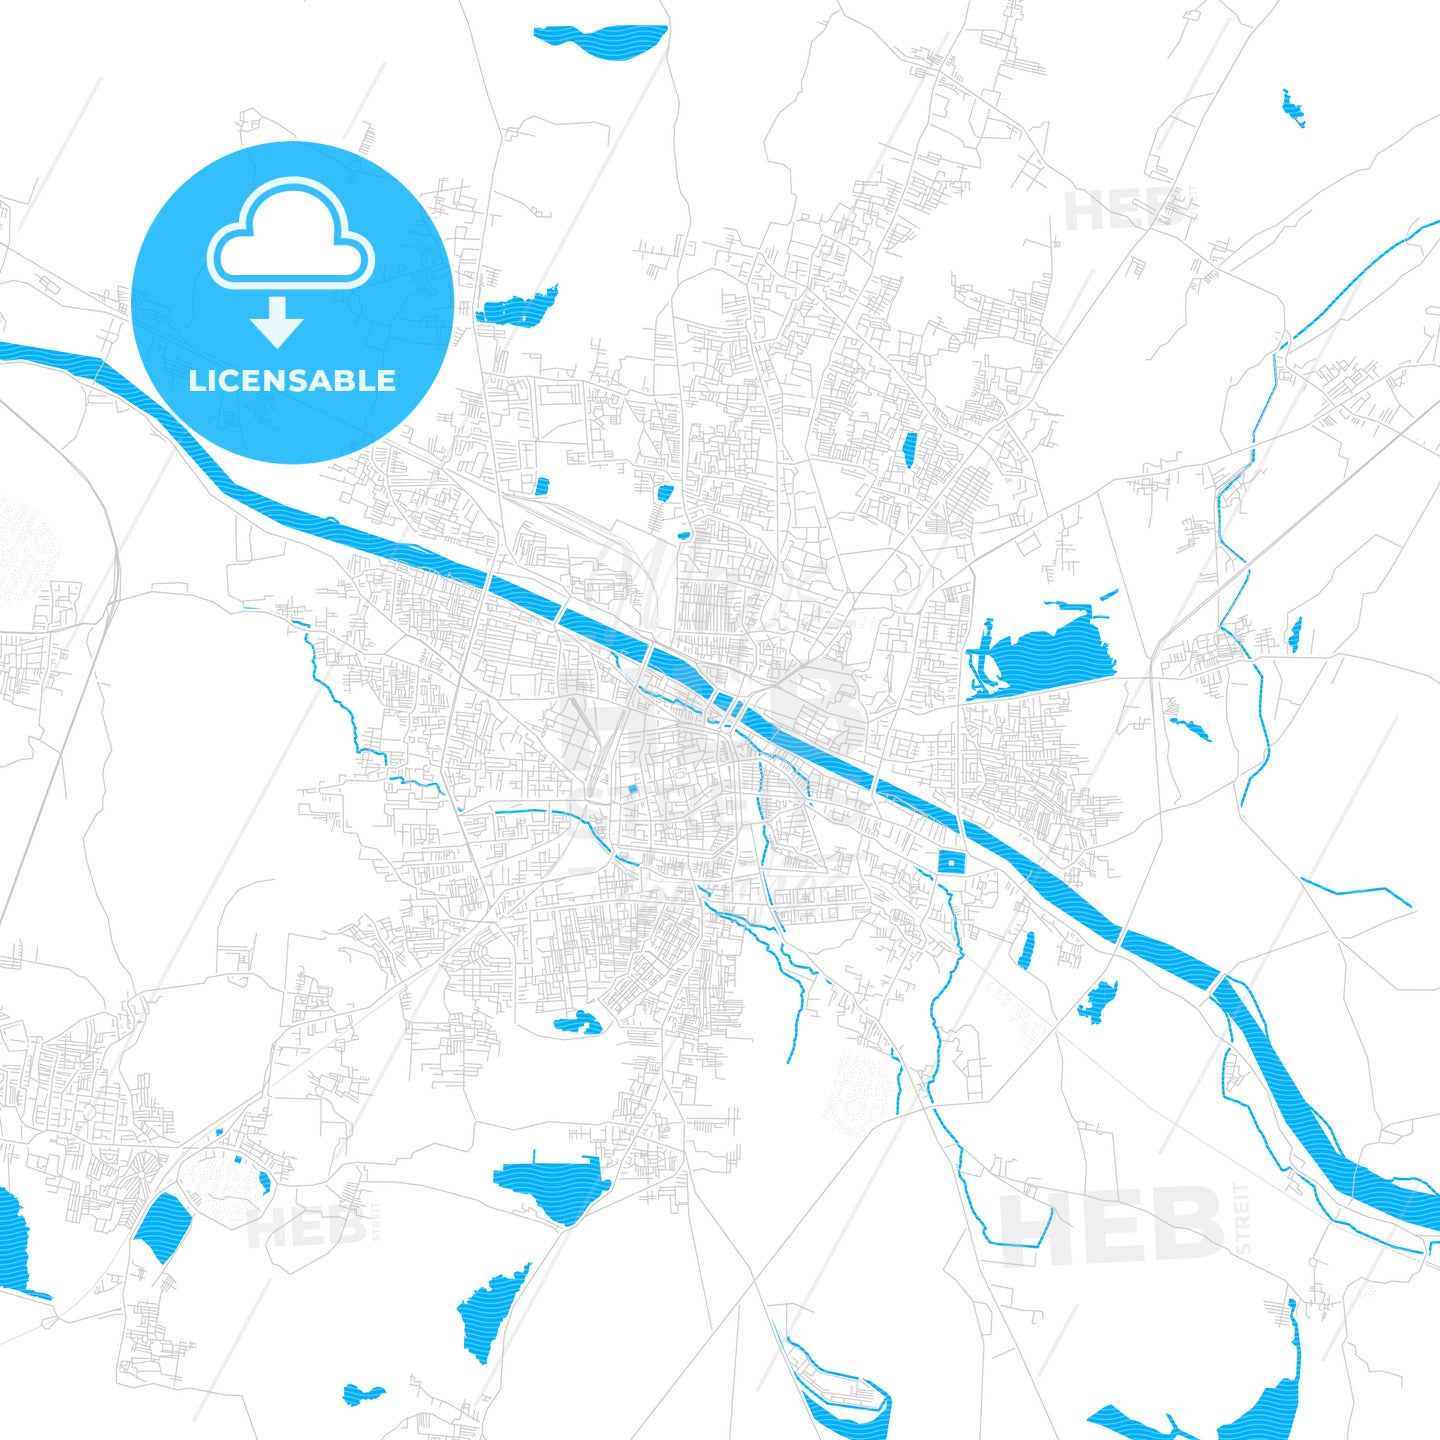 Madurai, India PDF vector map with water in focus